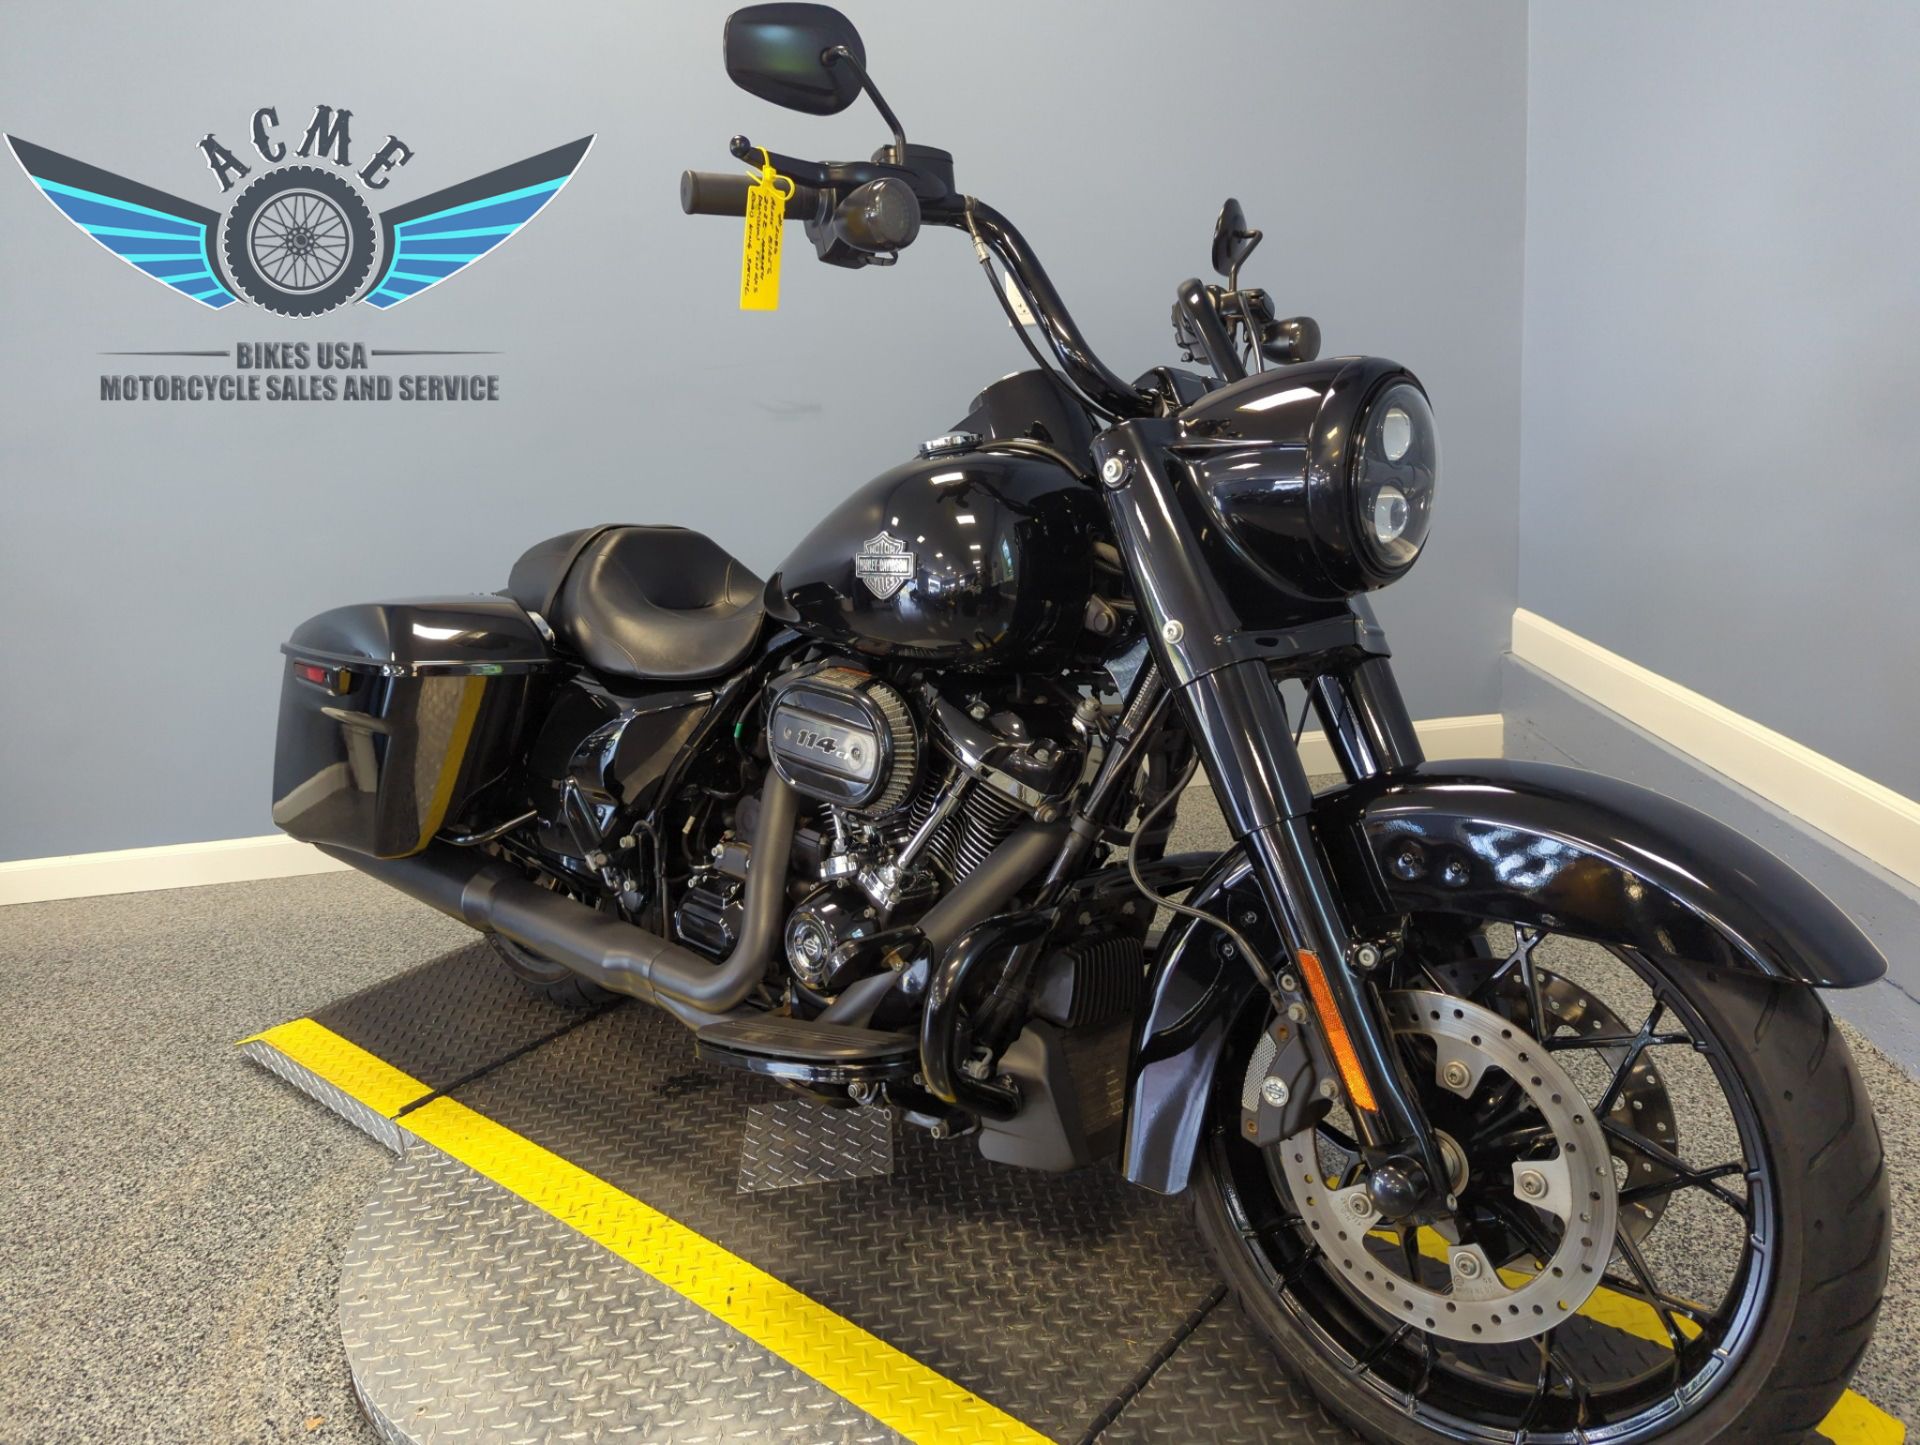 2022 Harley-Davidson Road King® Special in Meredith, New Hampshire - Photo 2